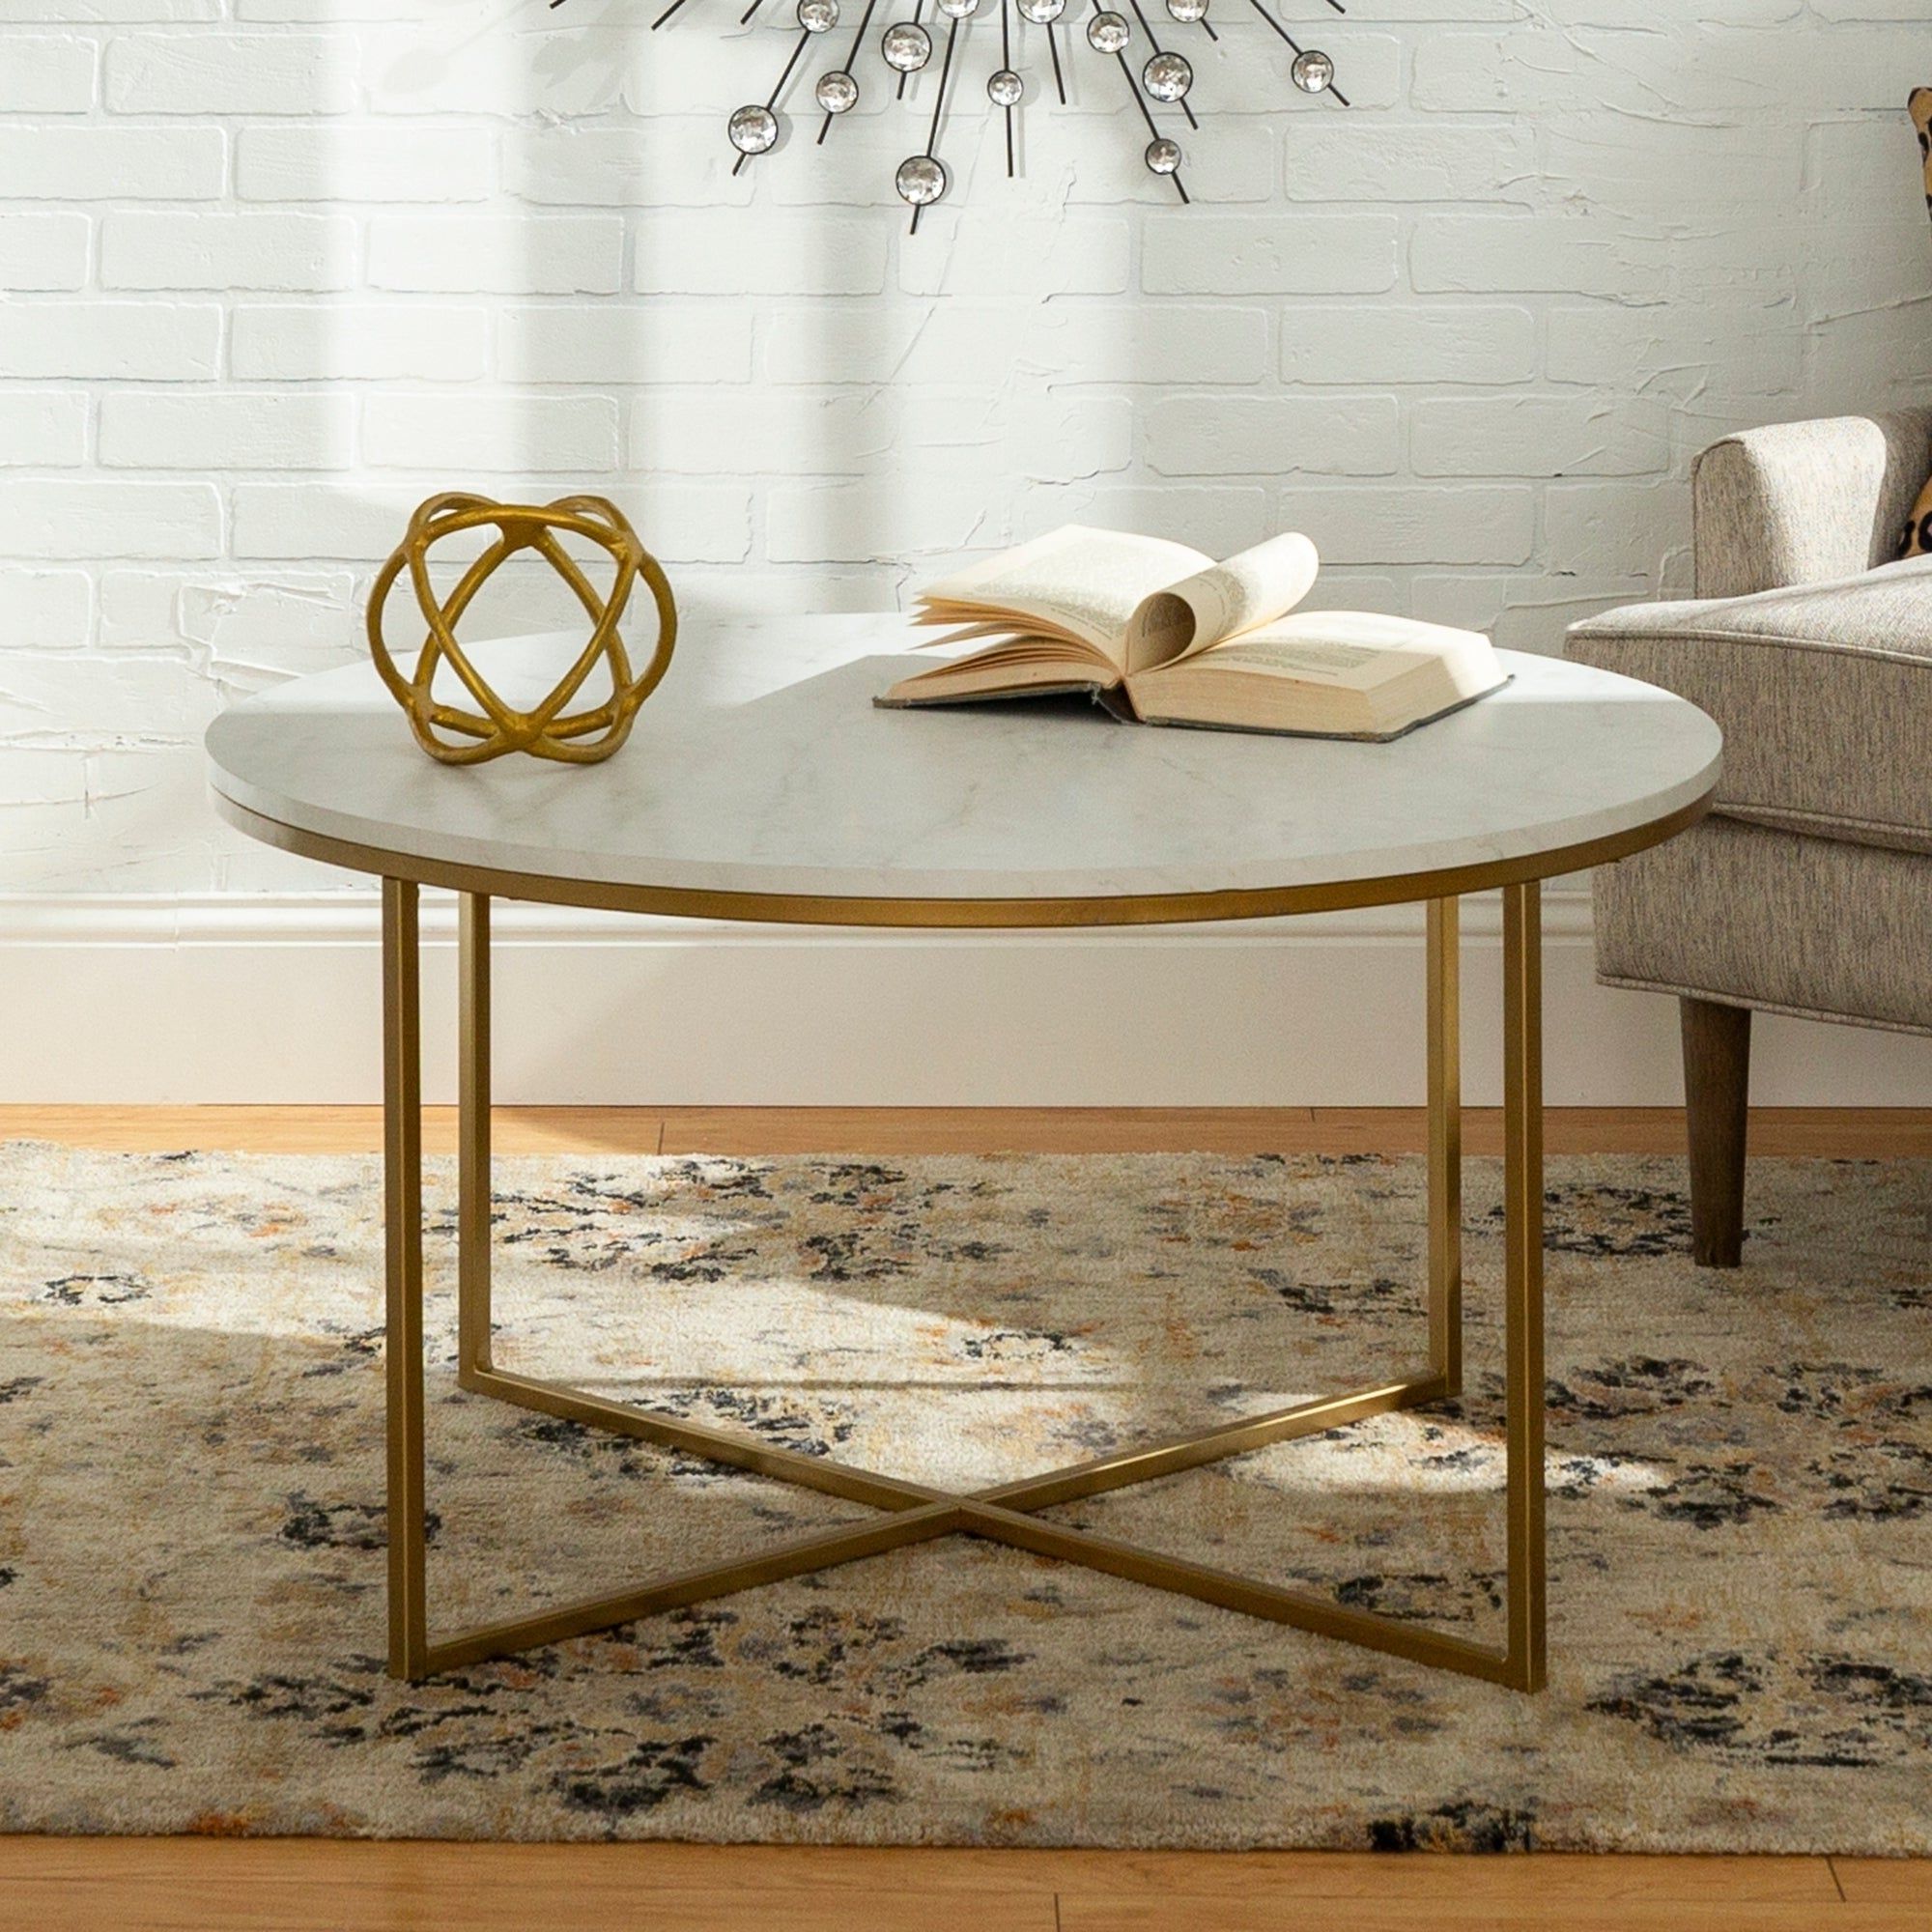 Silver Orchid Helbling 36 Inch Round Coffee Table, Gold Metal X Base, For  Living Room – 36 X 36 X 19h Throughout Current Silver Orchid Price Glass Coffee Tables (View 12 of 20)